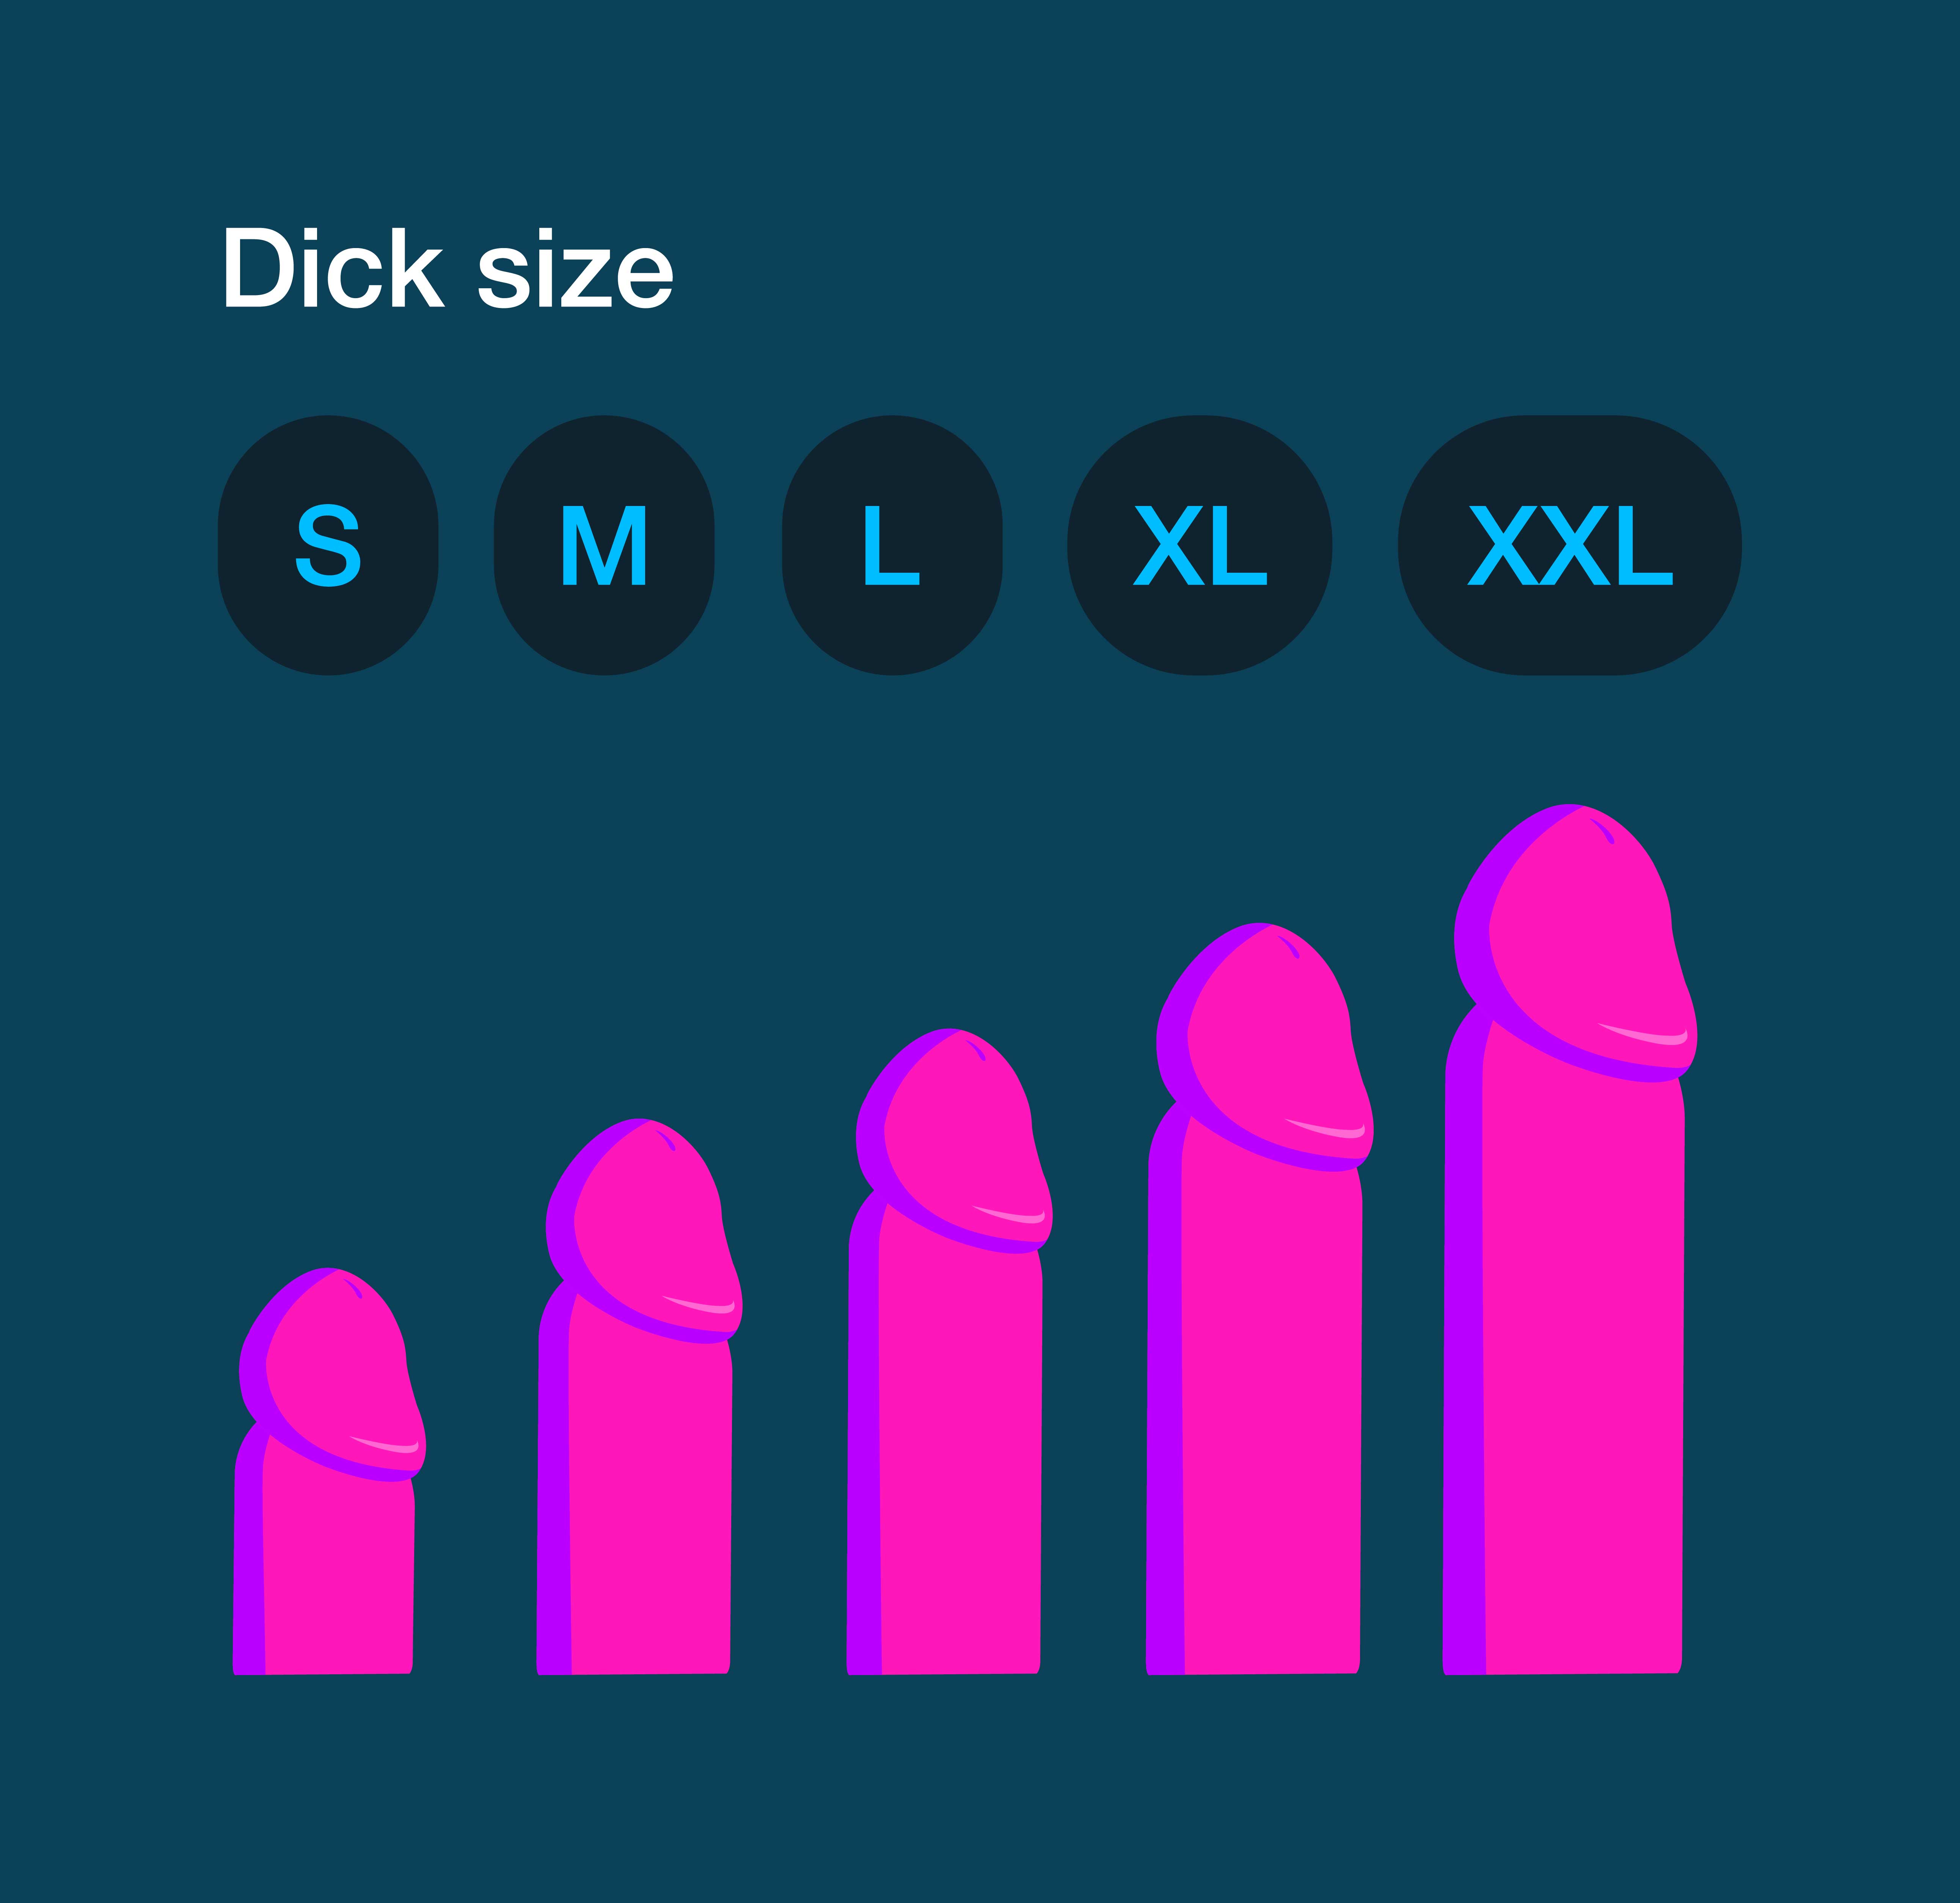 Size your dick